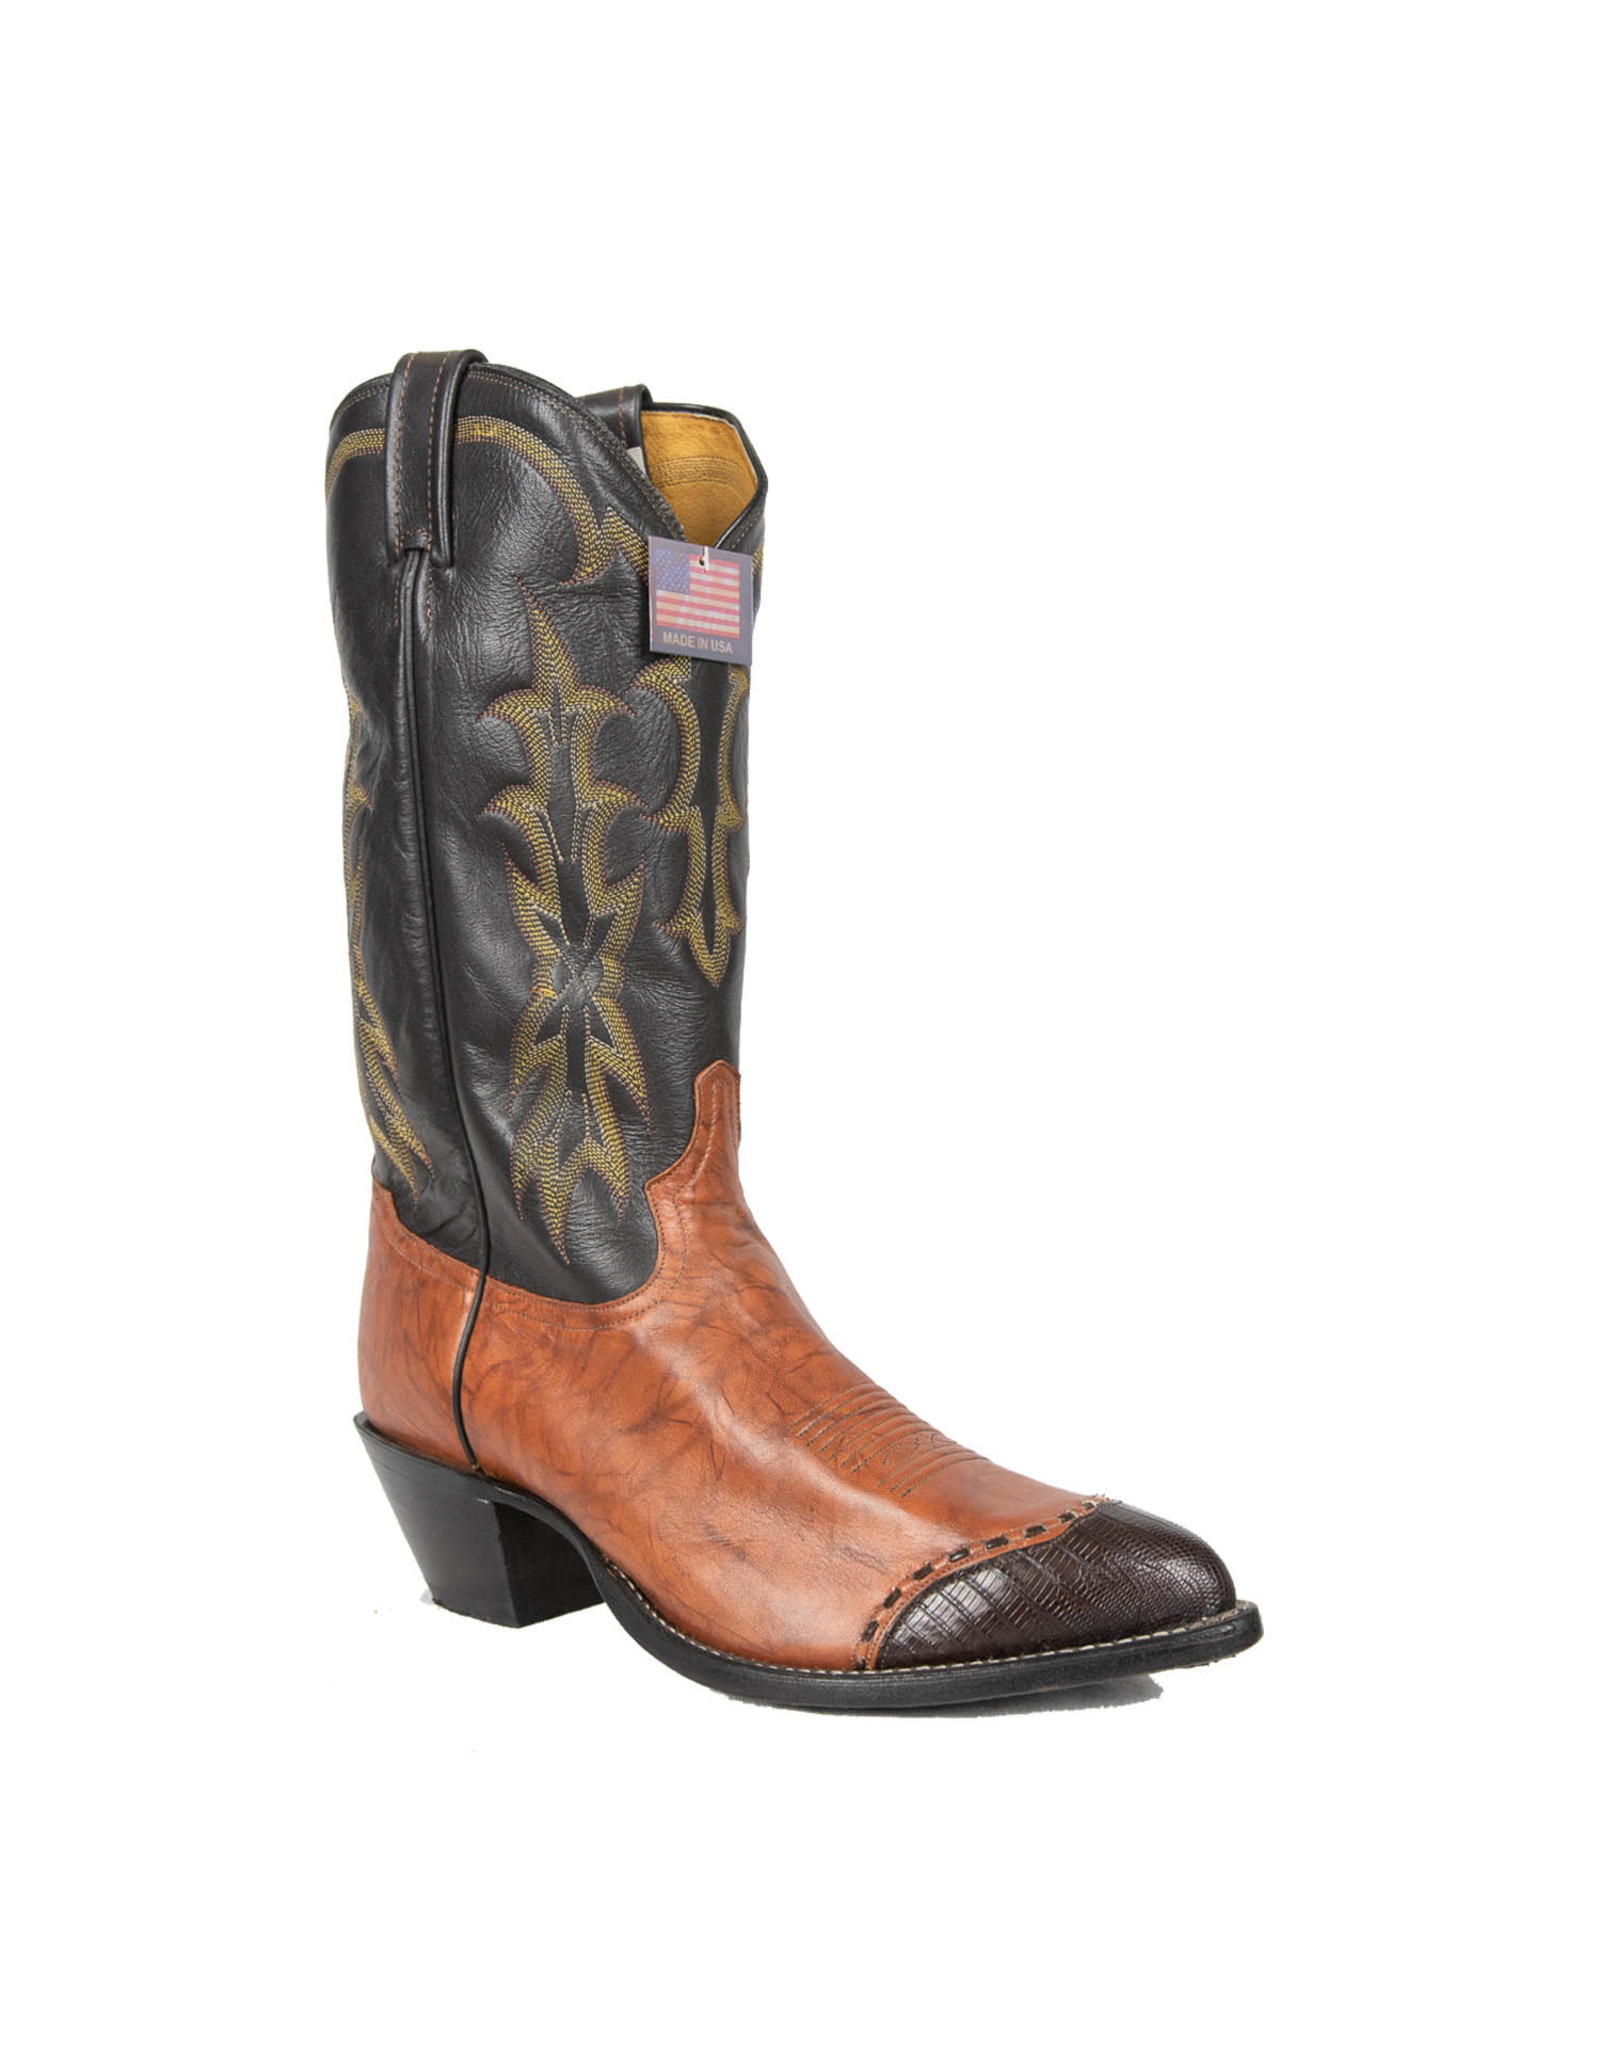 men's pointed toe cowboy boots